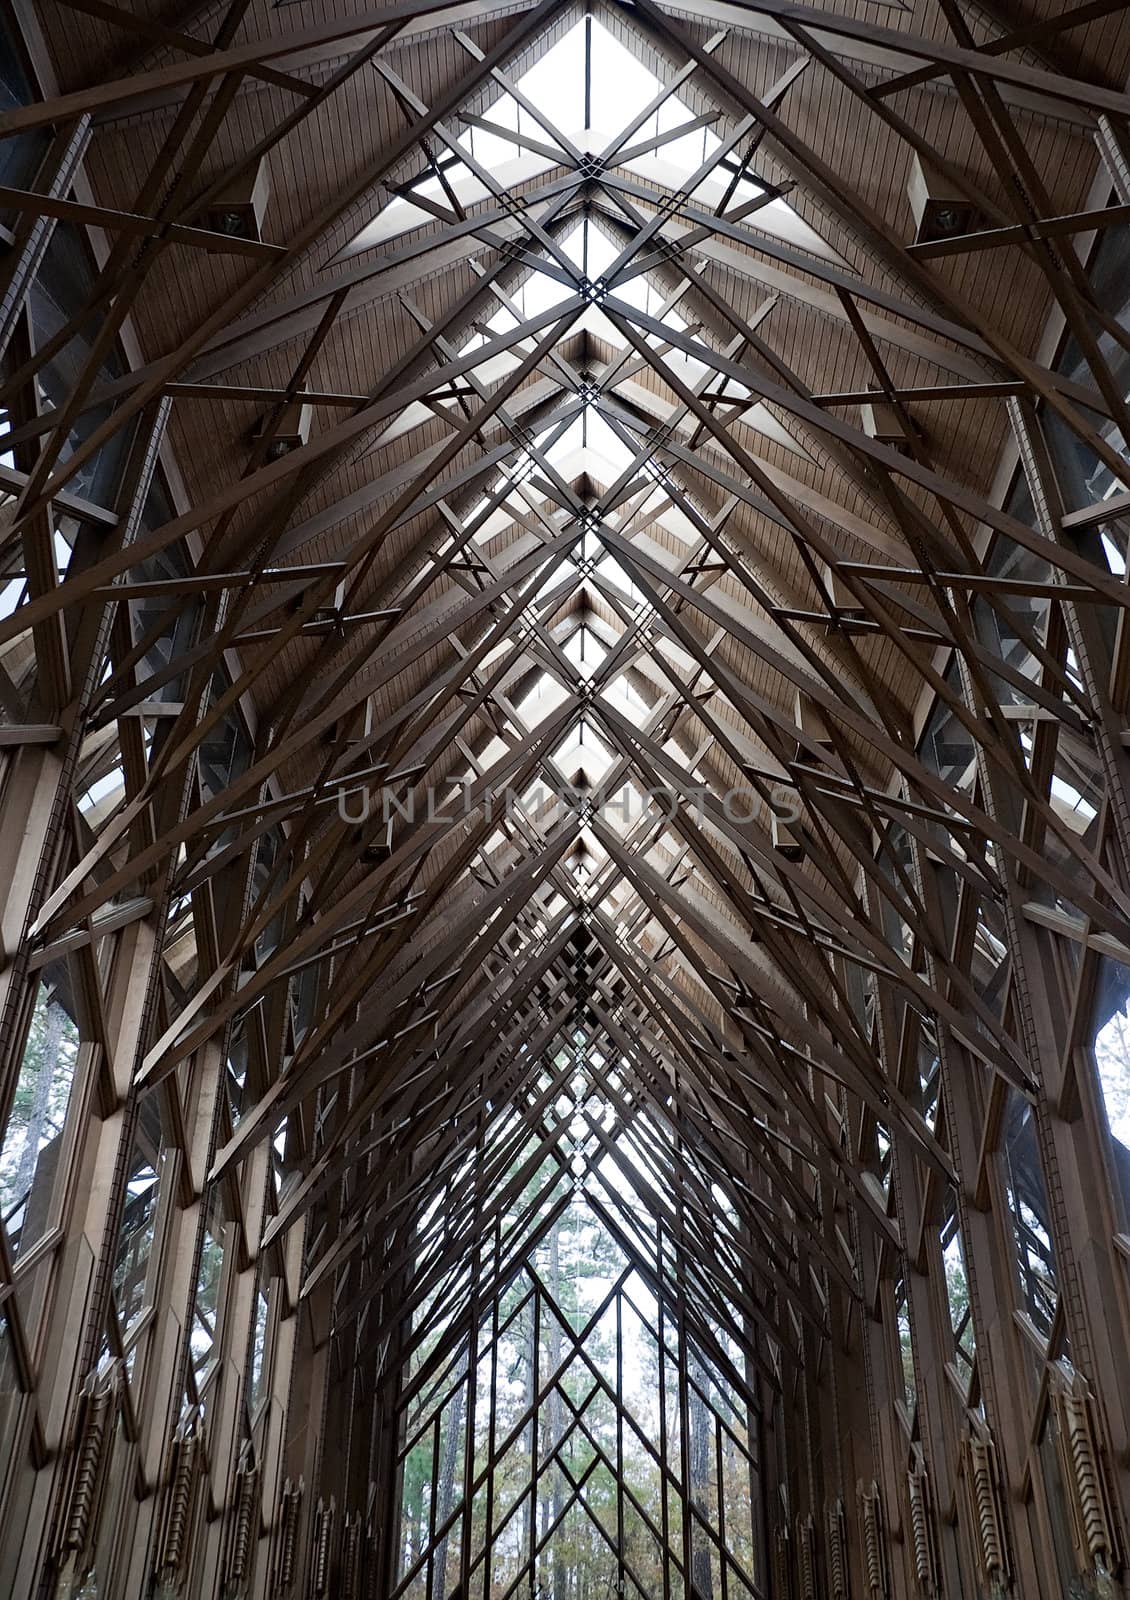 The ceiling of a wooden and glass church